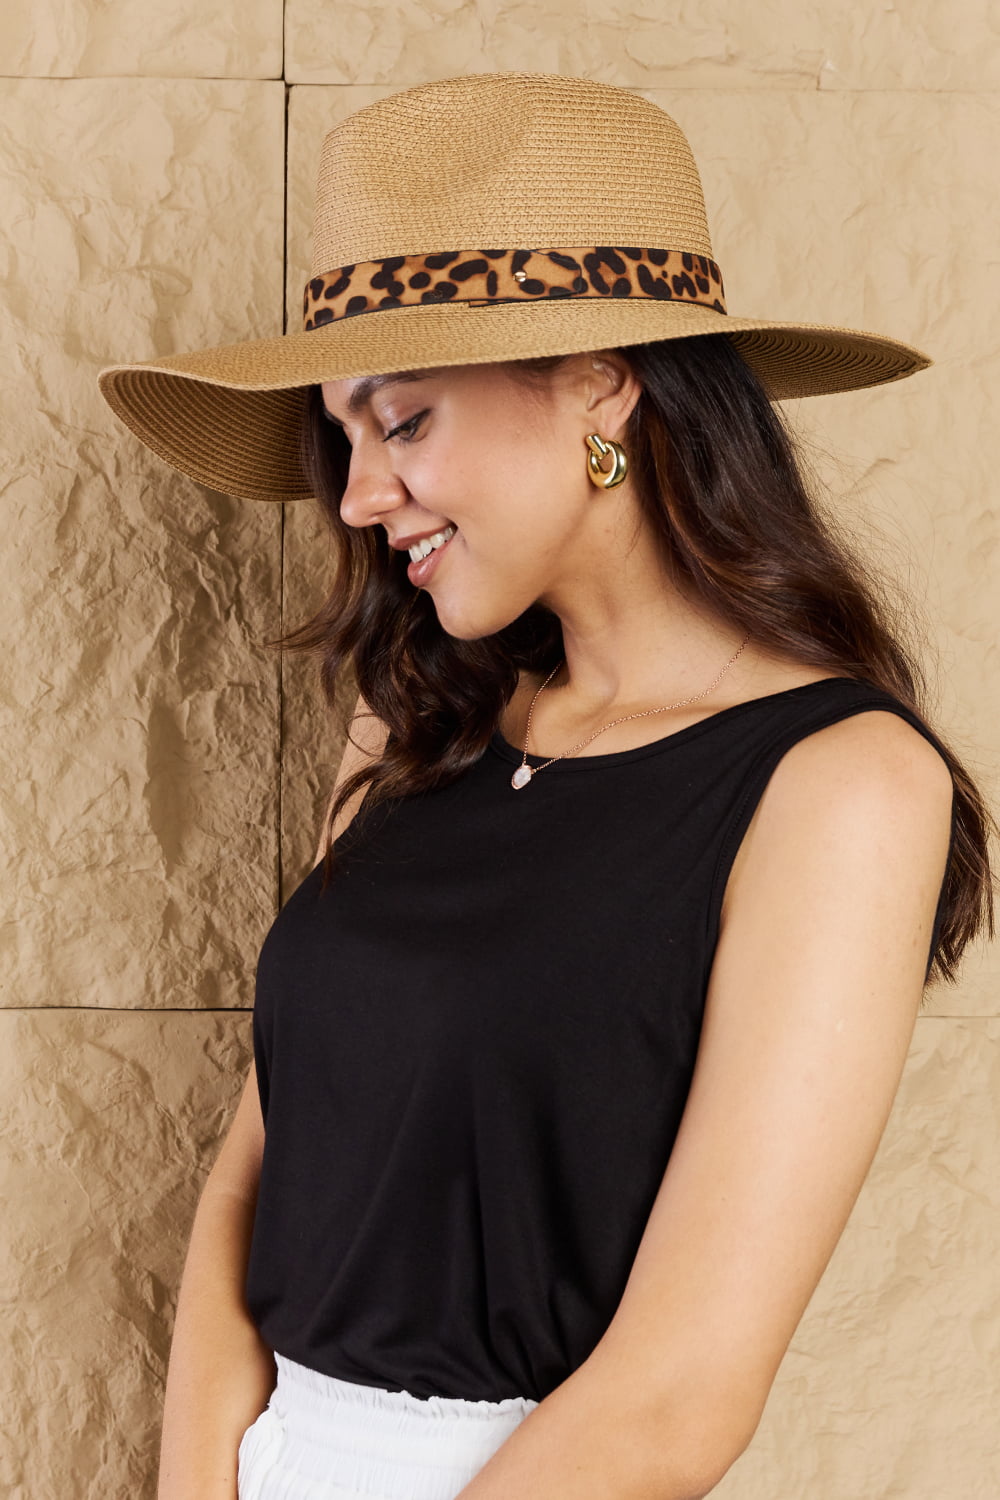 Women's Tan Straw Pool Hat with Leopard Band